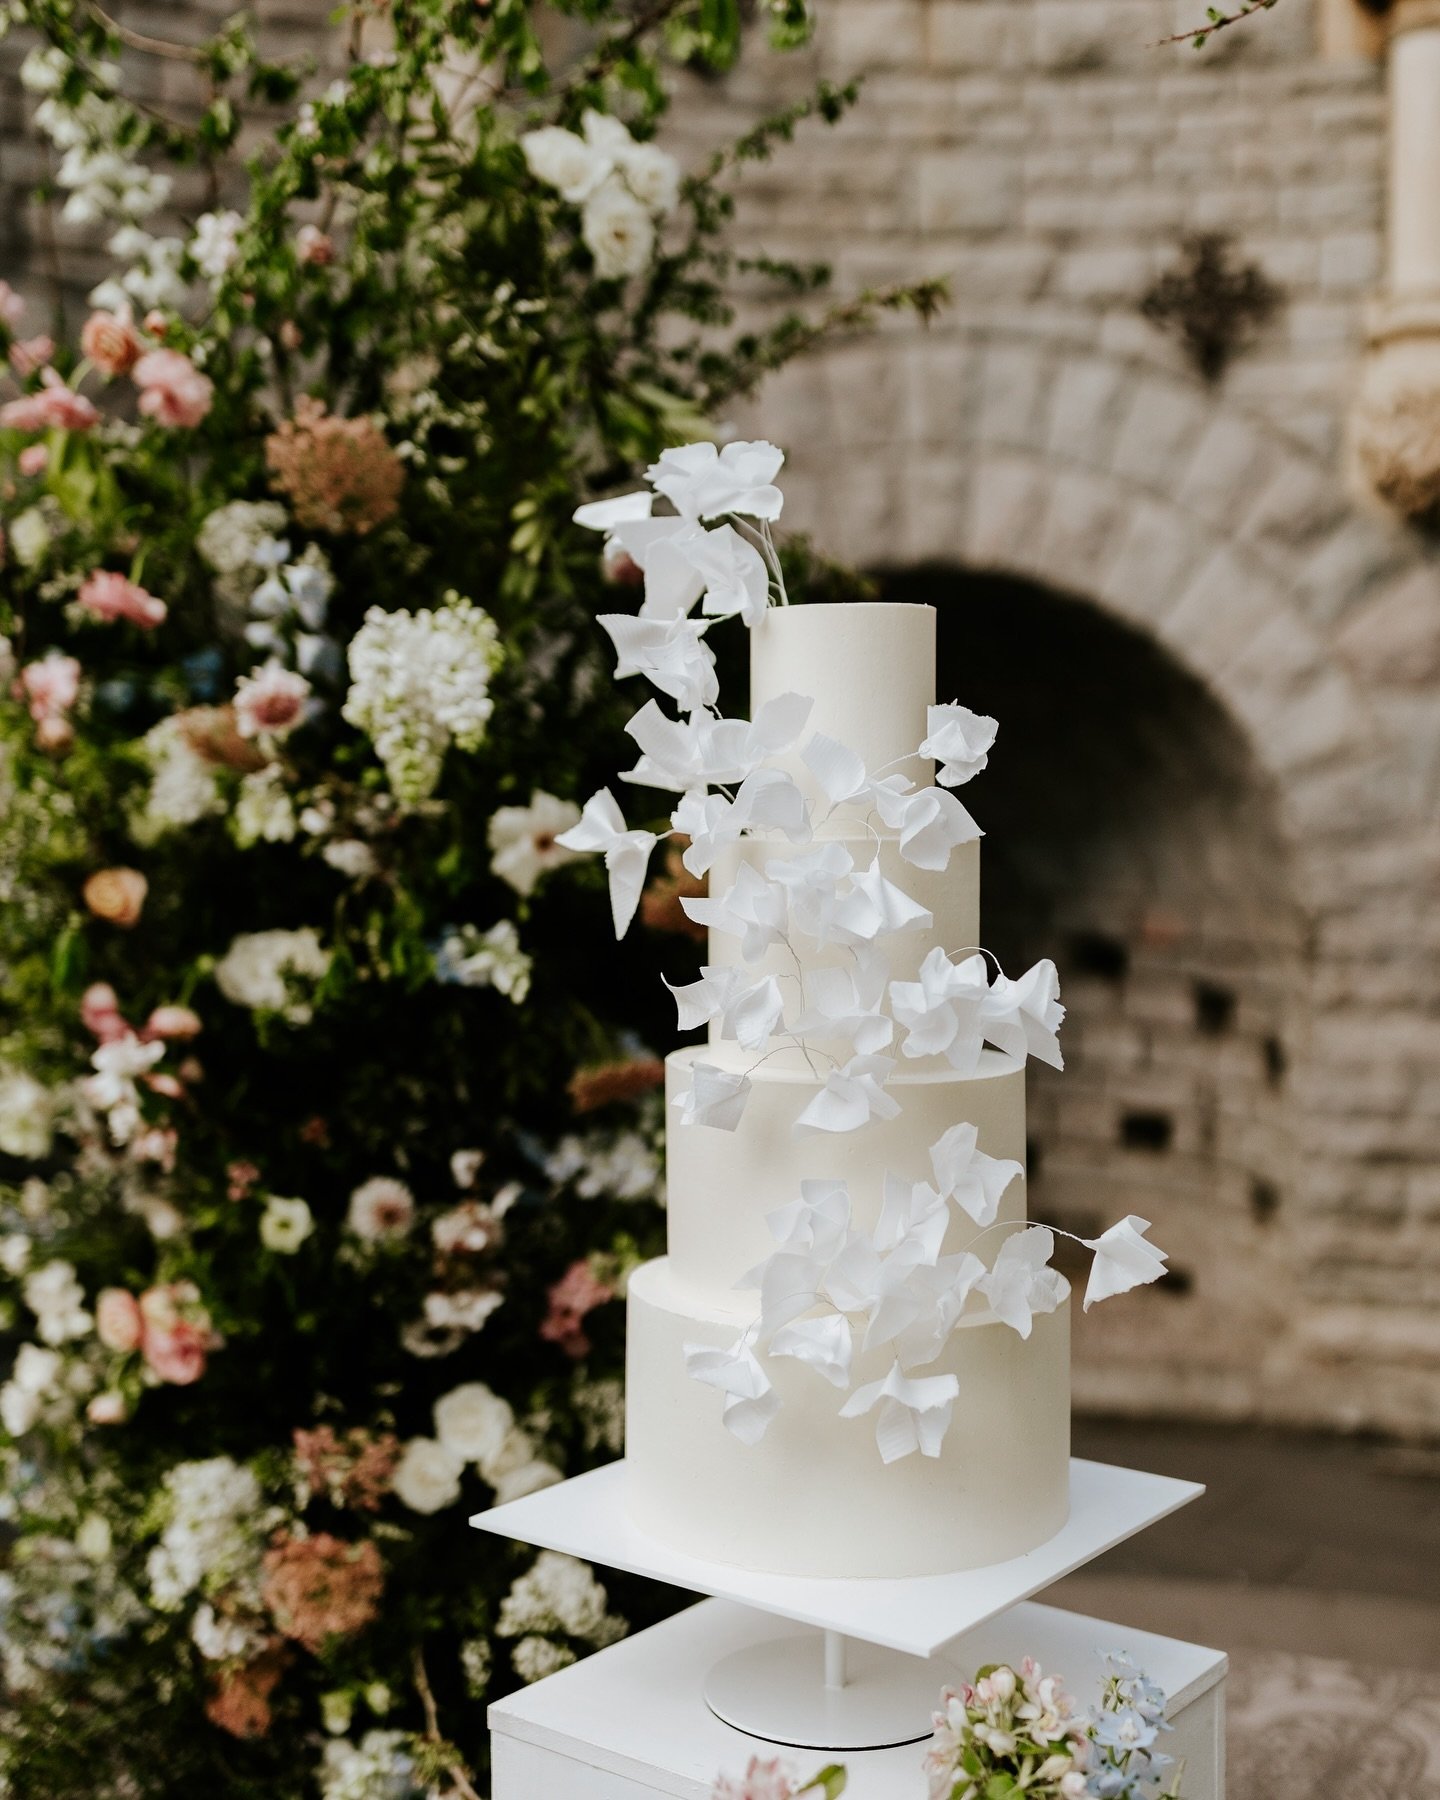 &lsquo;SWEETPEA&rsquo;

The four tier &lsquo;Sweetpea&rsquo; displayed amongst the most beautiful floral arch on a gorgeous white stiletto cake stand from @prop.options Think about how you are going to display your cake, make it a design feature of y